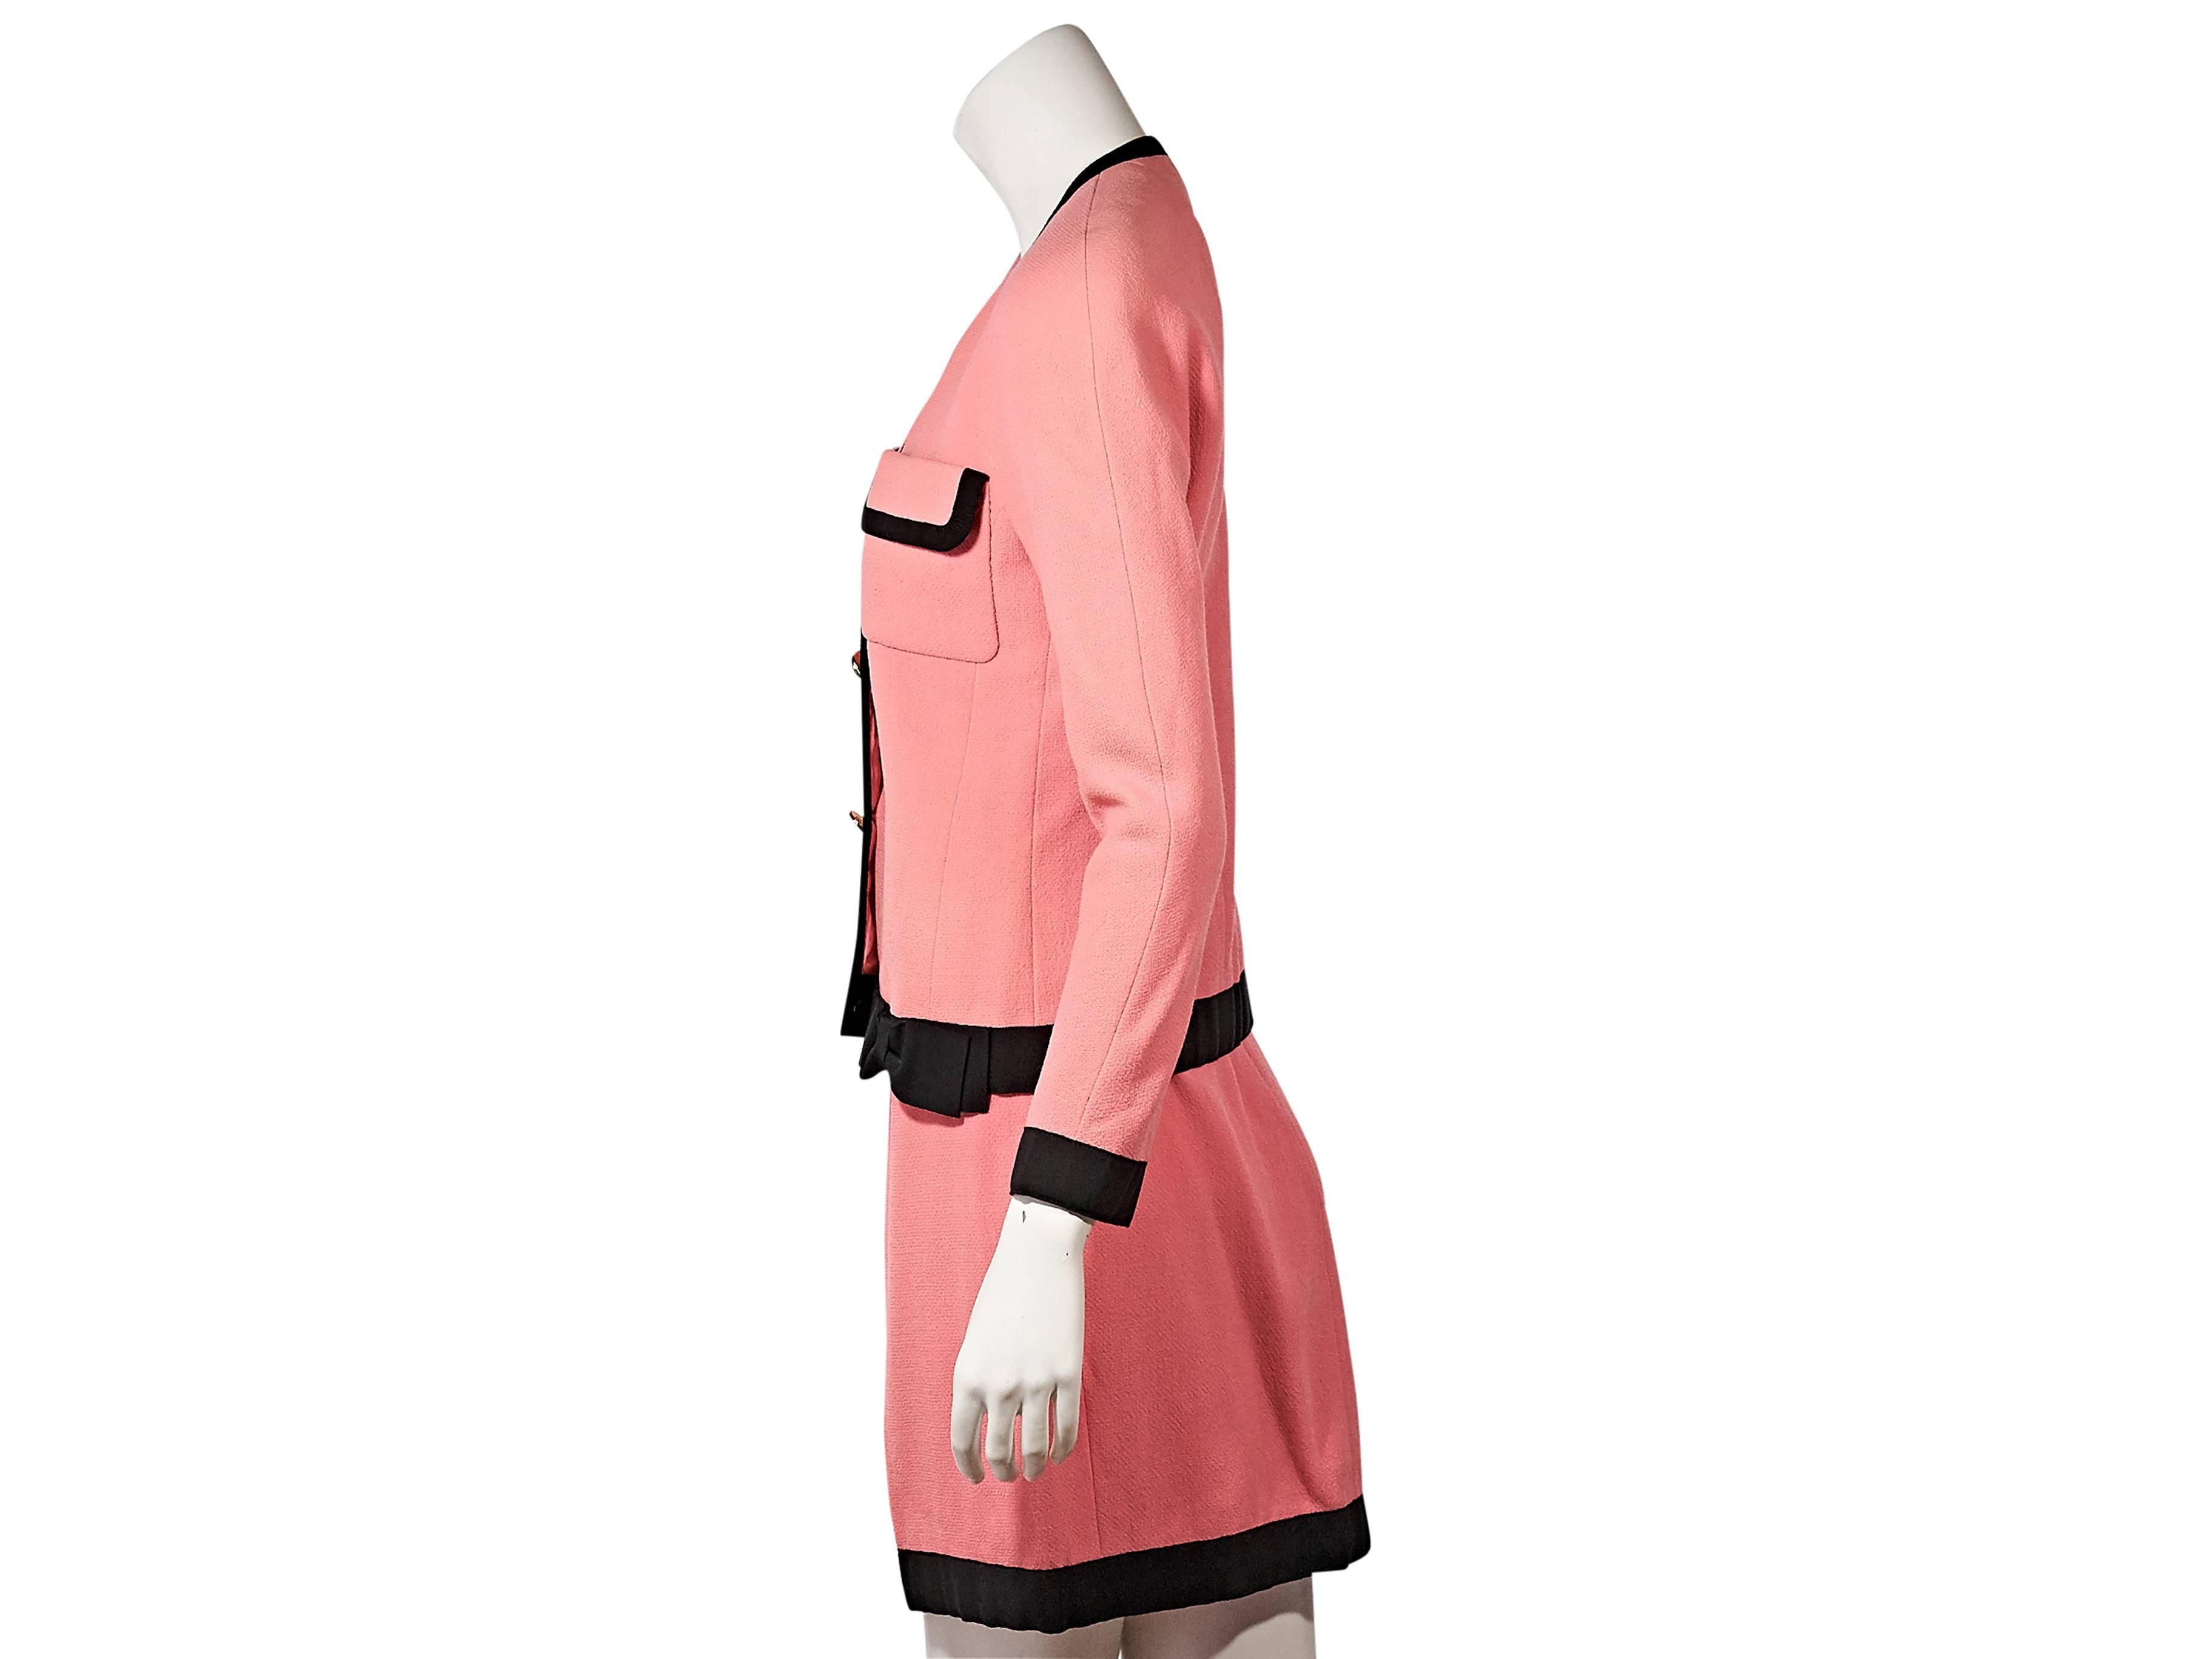 Product details: Vintage bright pink skirt suit set by Chanel. Trimmed with black grosgrain. Bracelet-length sleeves. Double-breasted button-front closure. Chest flap pockets. Matching skirt. Banded waist. 
Condition: Very good.